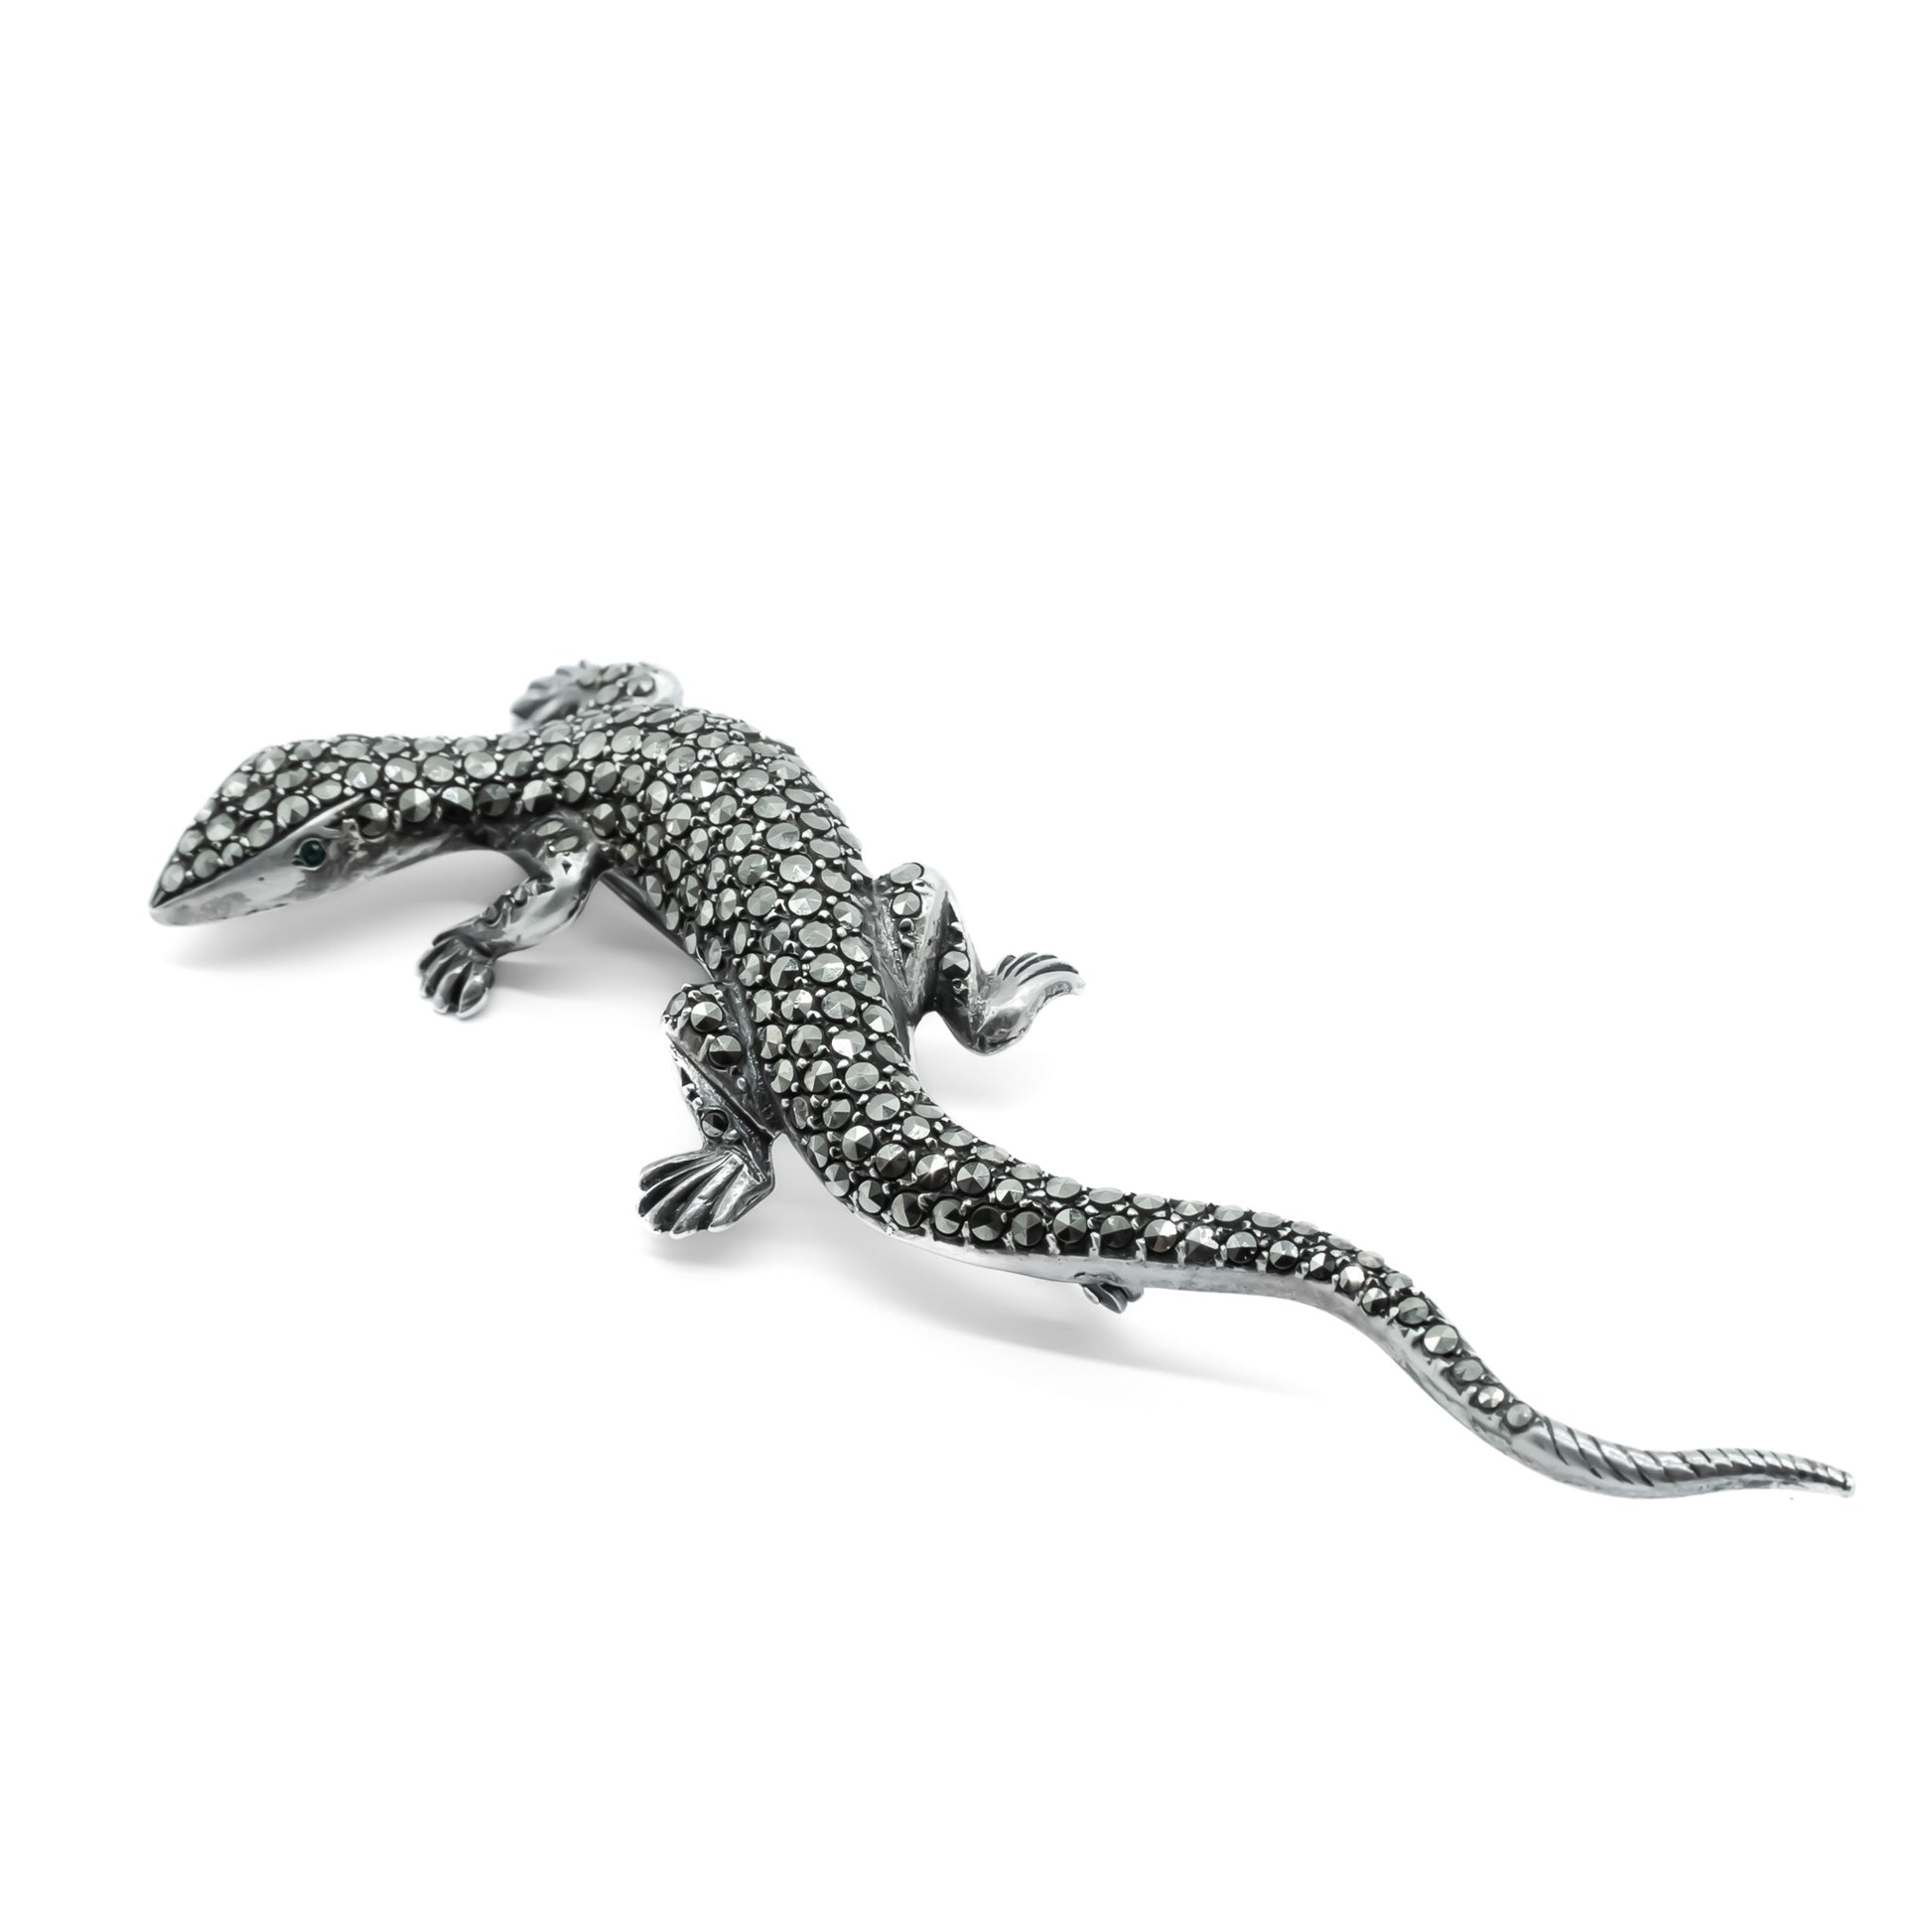 Stunning life-size lizard brooch set with lots of sparkling marcasites and green glass eyes. Circa 1930’s